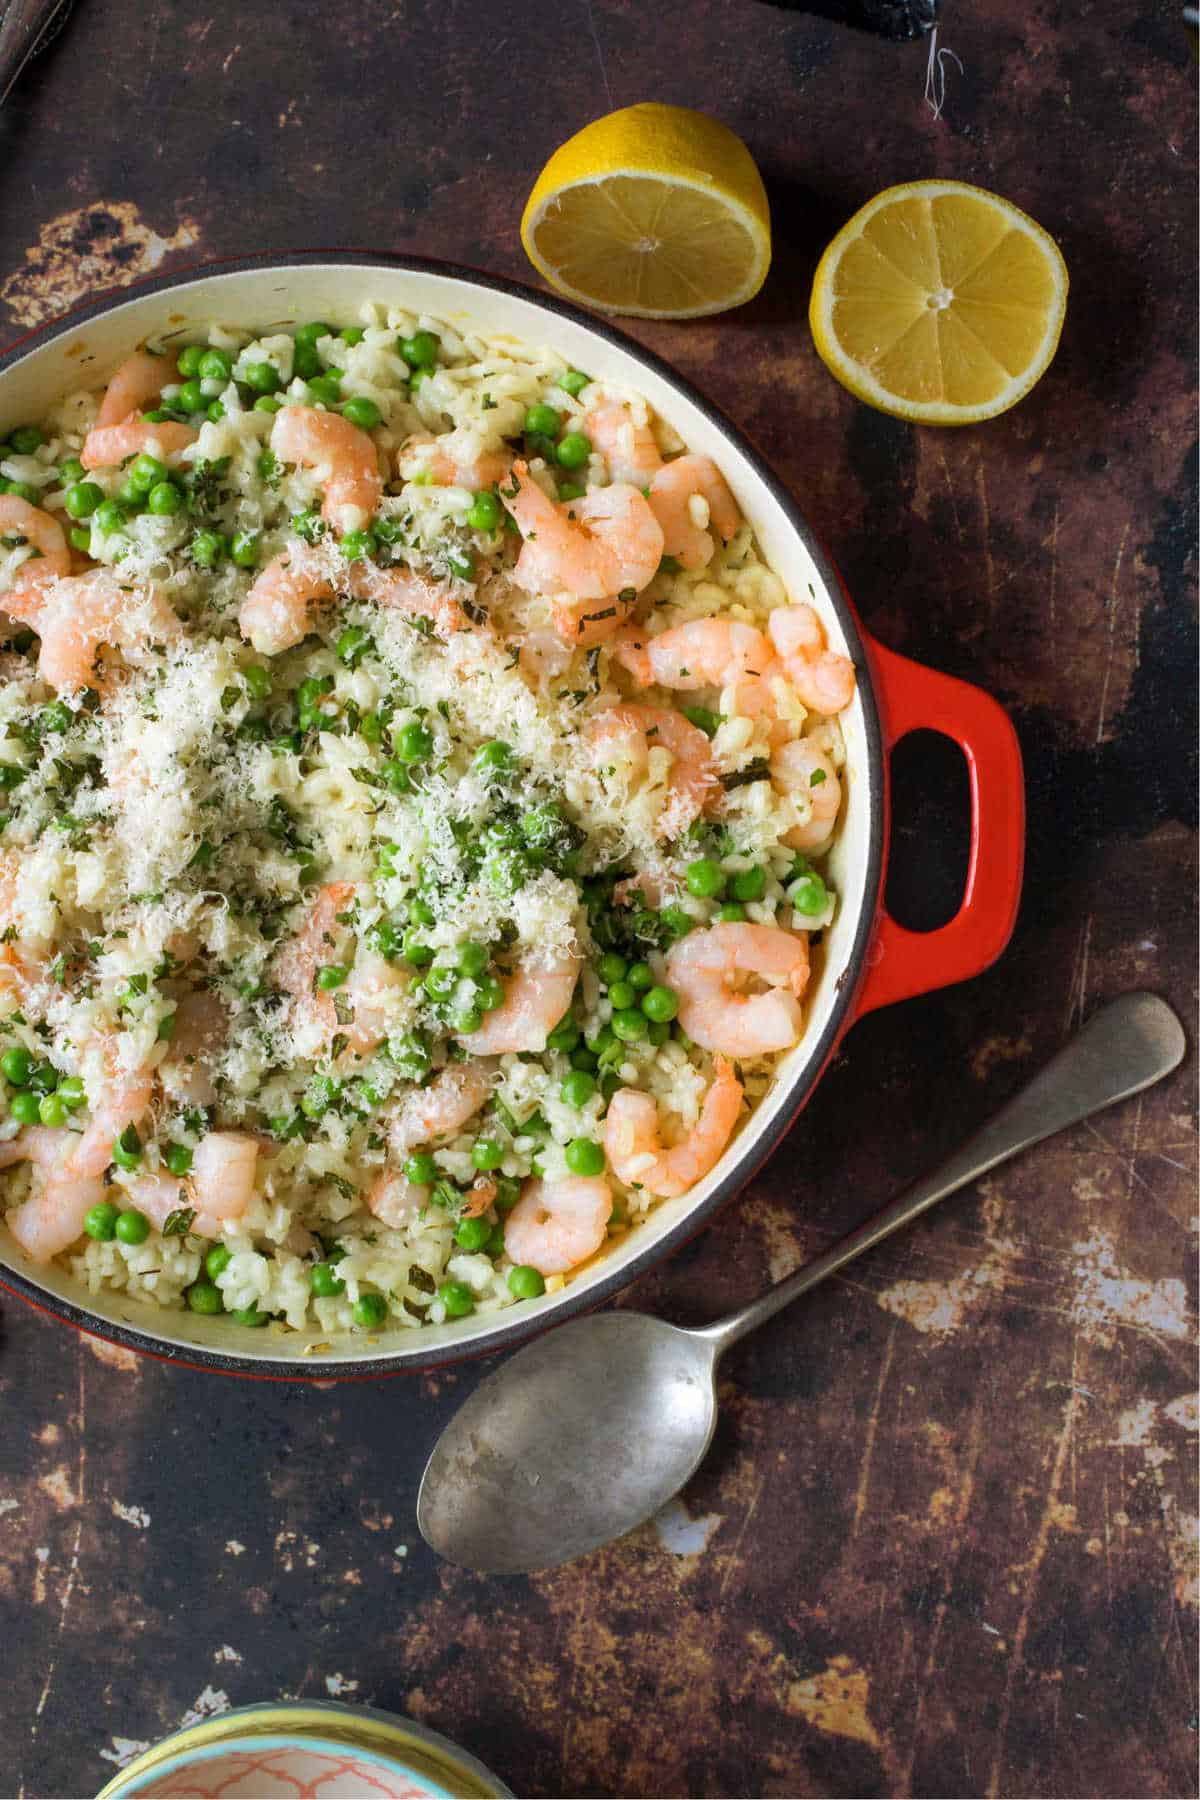 Prawn and pea risotto with fresh lemon wedges, ready for serving.